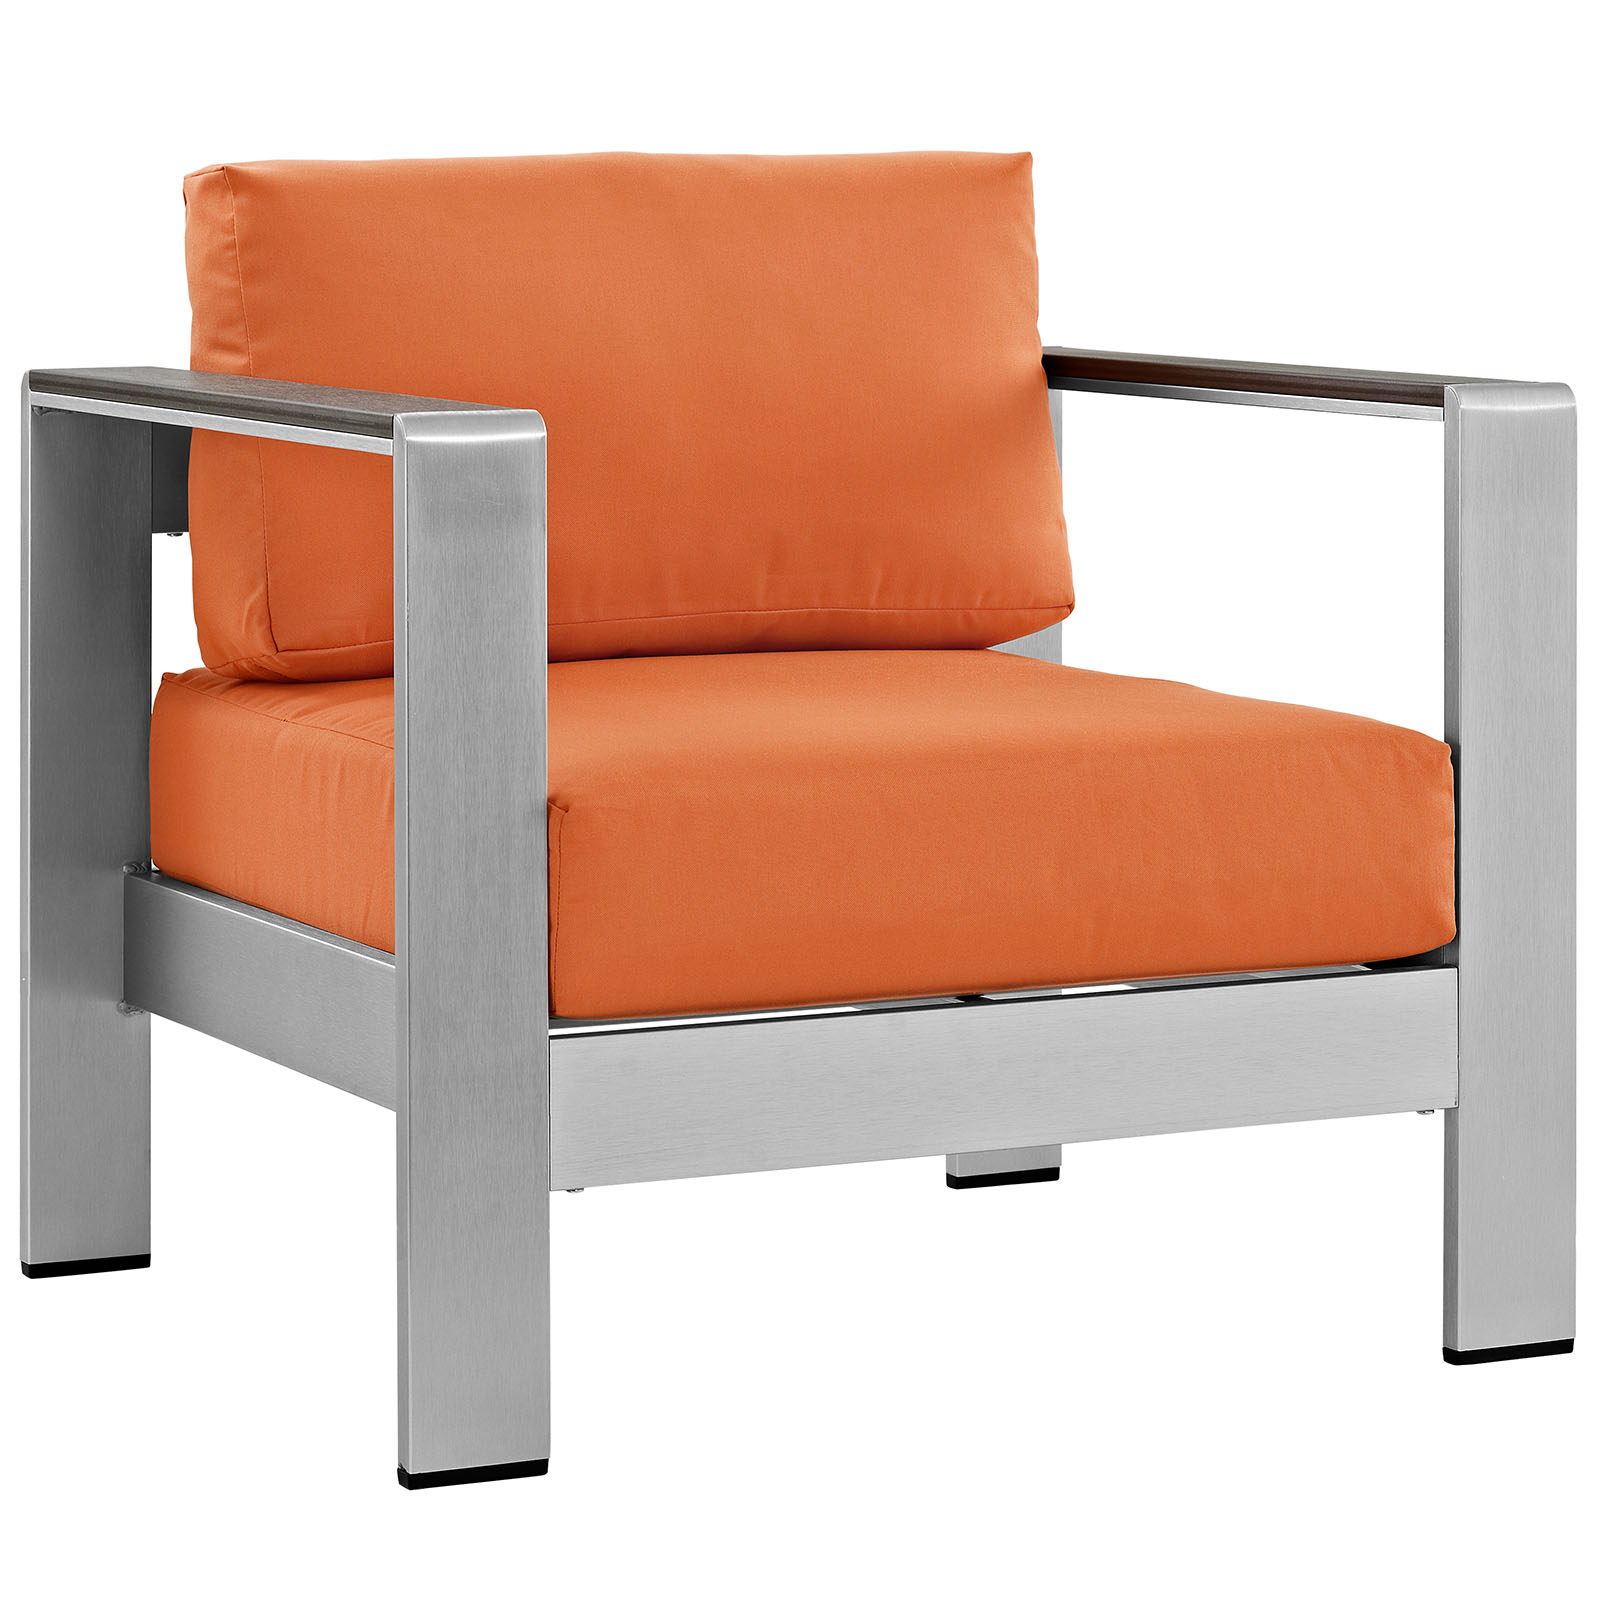 Modway Shore 7 Piece Outdoor Patio Aluminum Sectional Sofa Set in Silver Orange - image 5 of 8